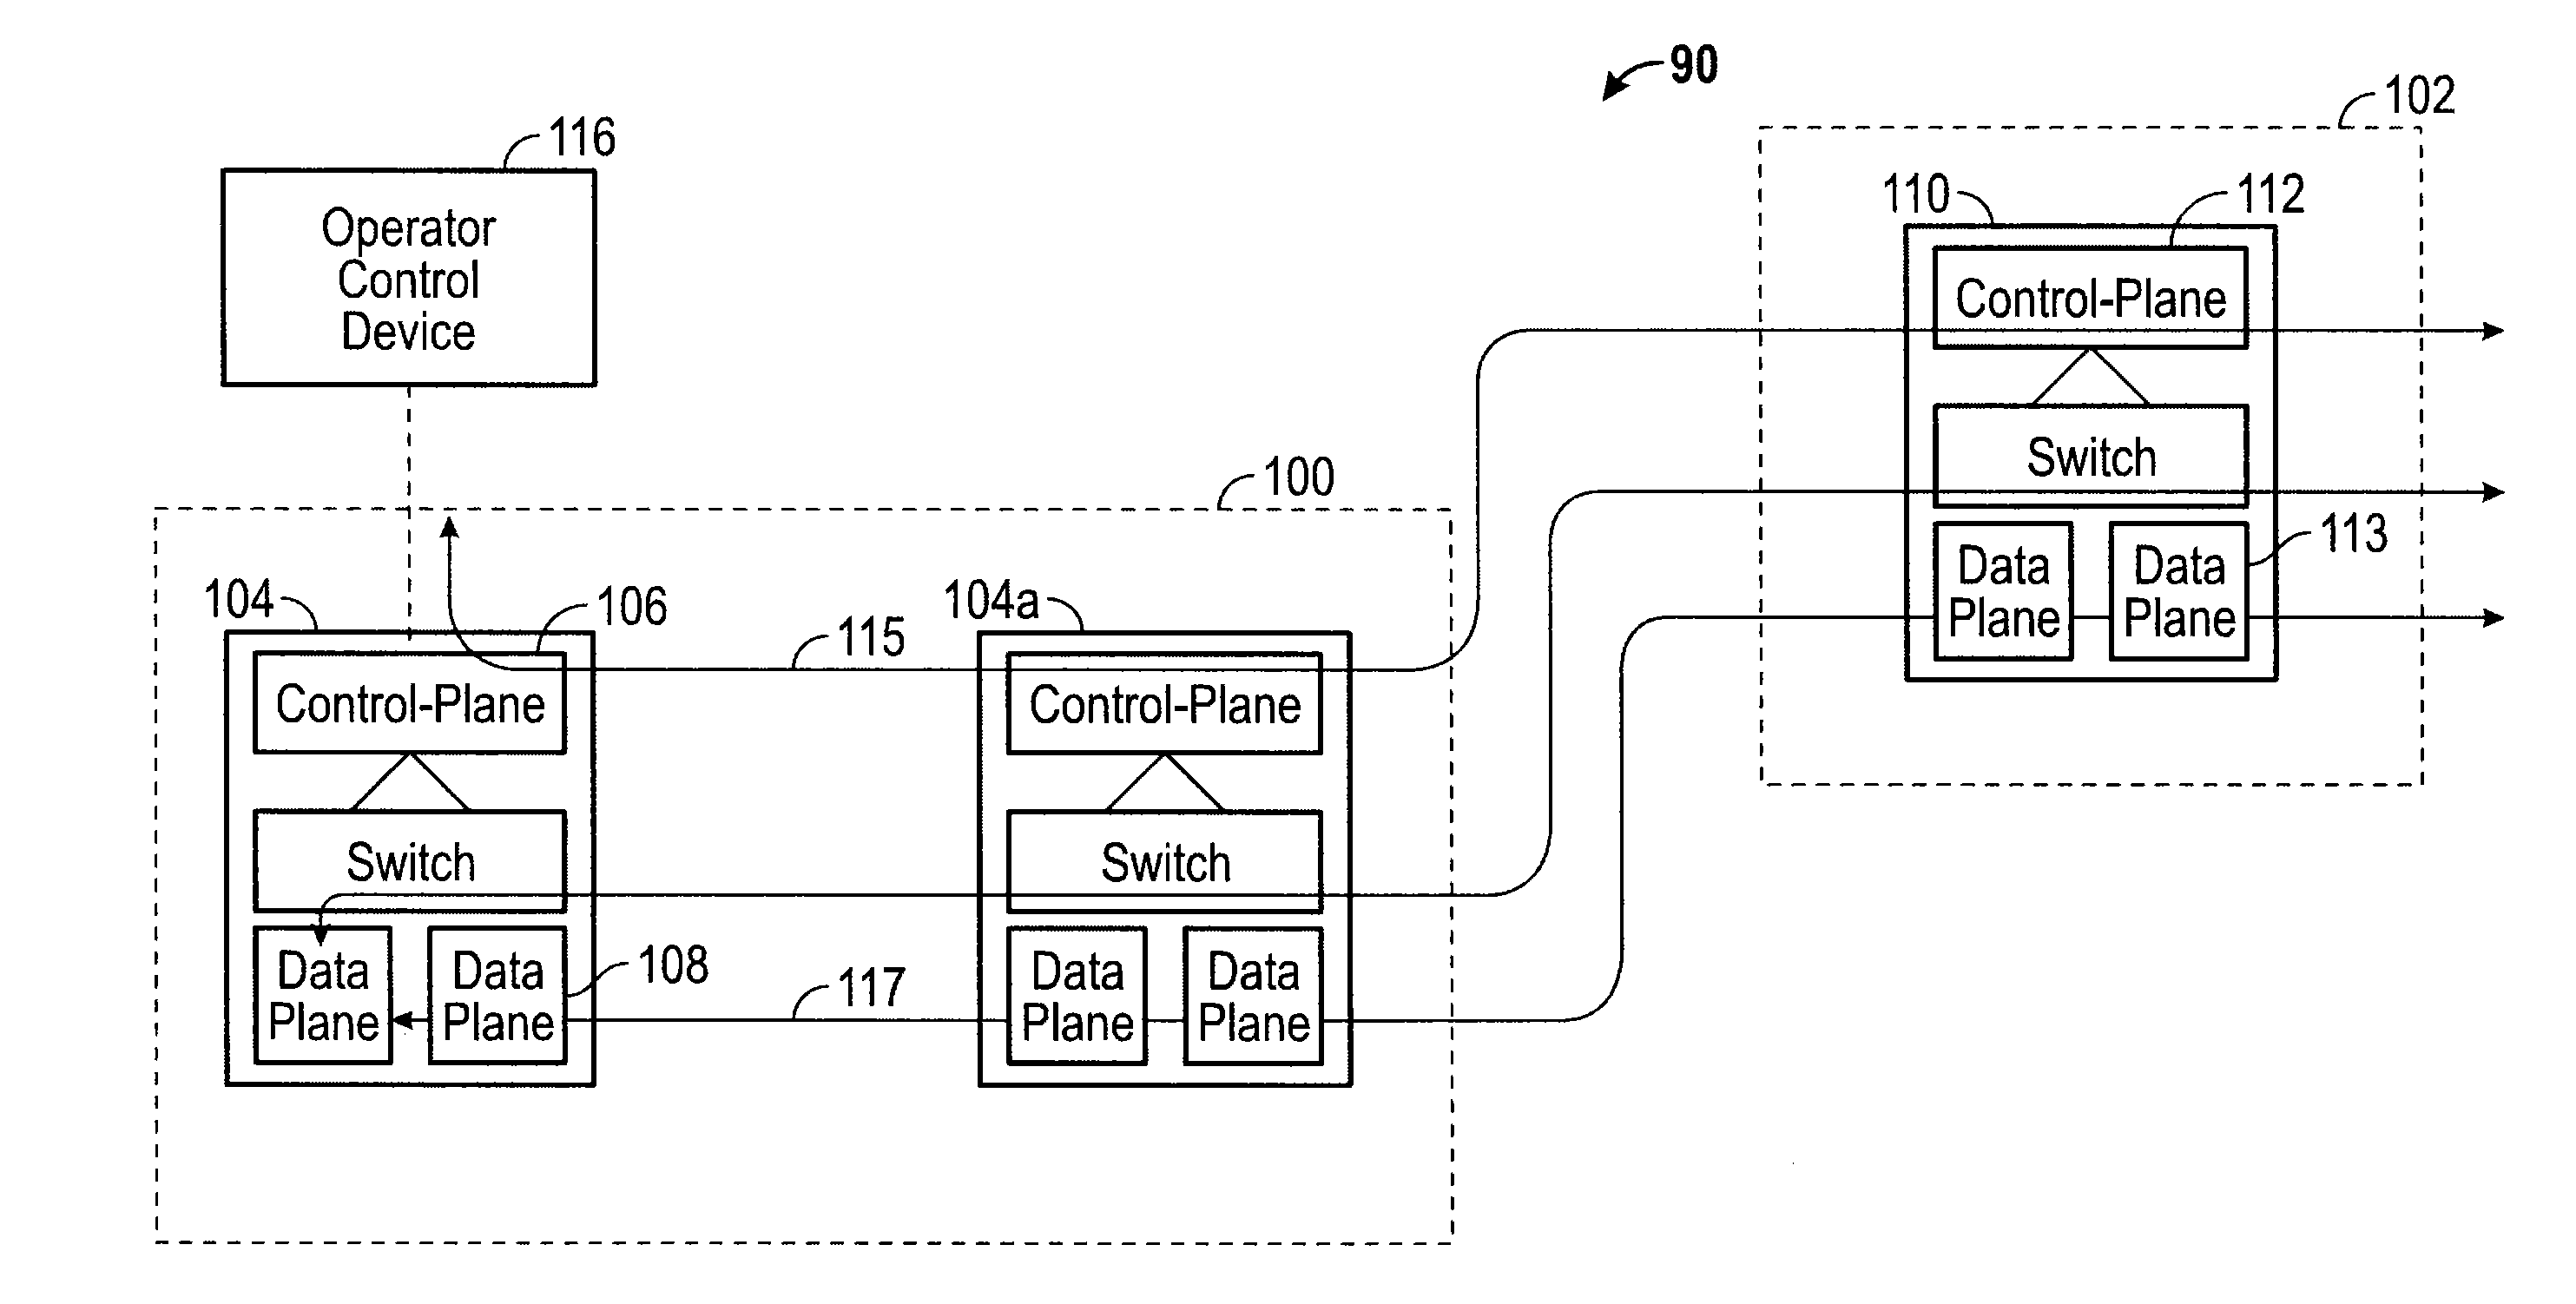 Method for Service Interface Encoding to Achieve Secure and Robust Network-to-Network Interface